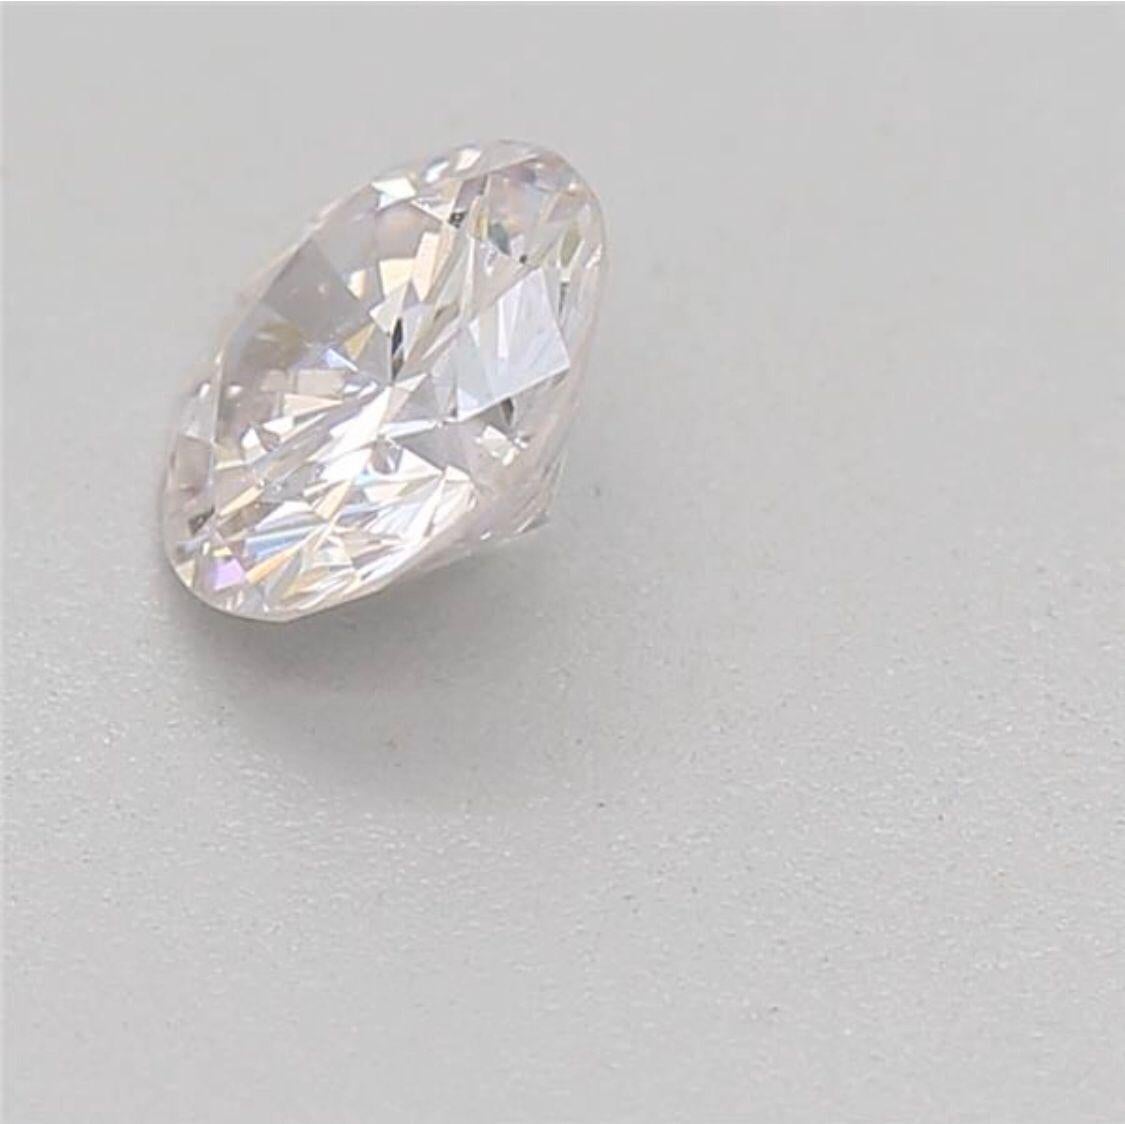 0.31 Carat Faint Pink Round Cut Diamond SI1 Clarity CGL Certified For Sale 7